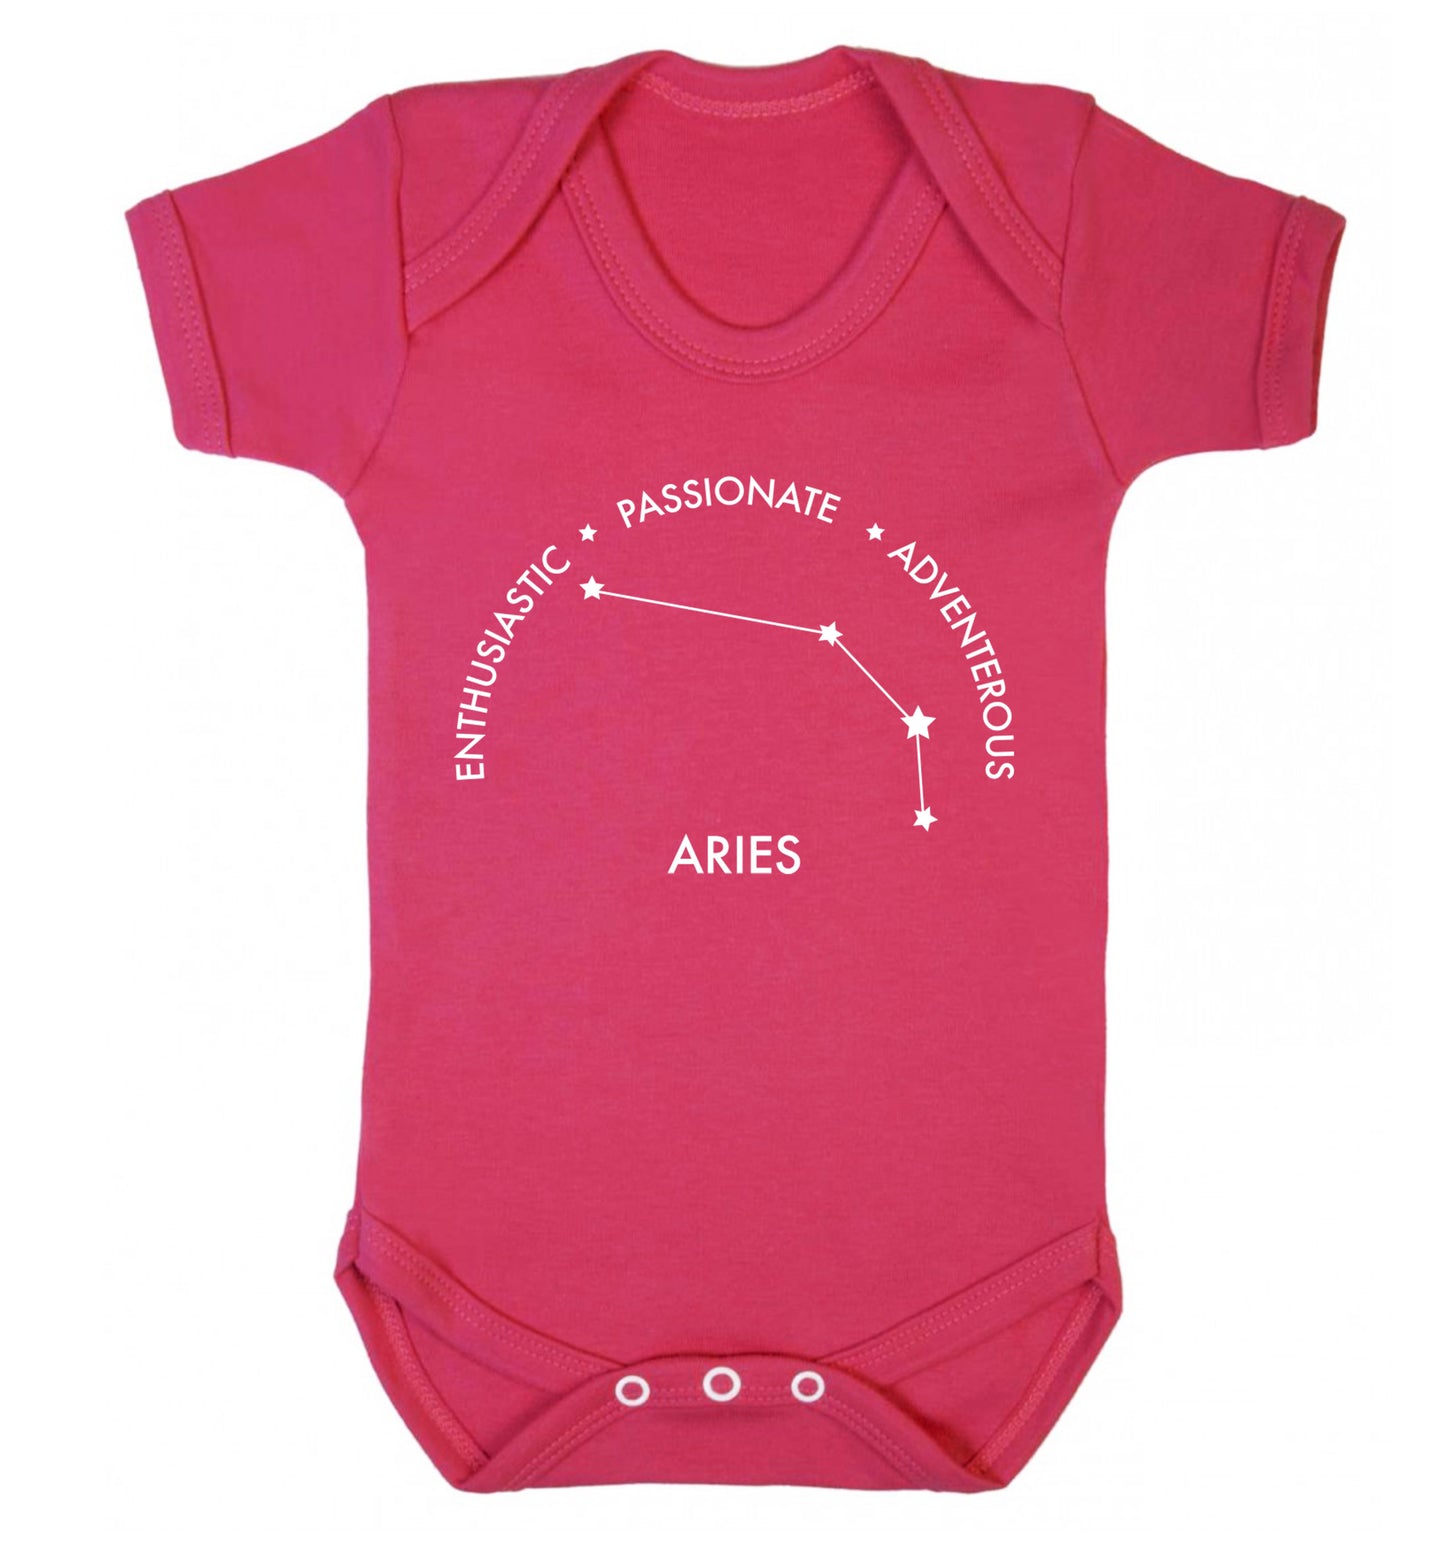 Aries enthusiastic | passionate | adventerous Baby Vest dark pink 18-24 months